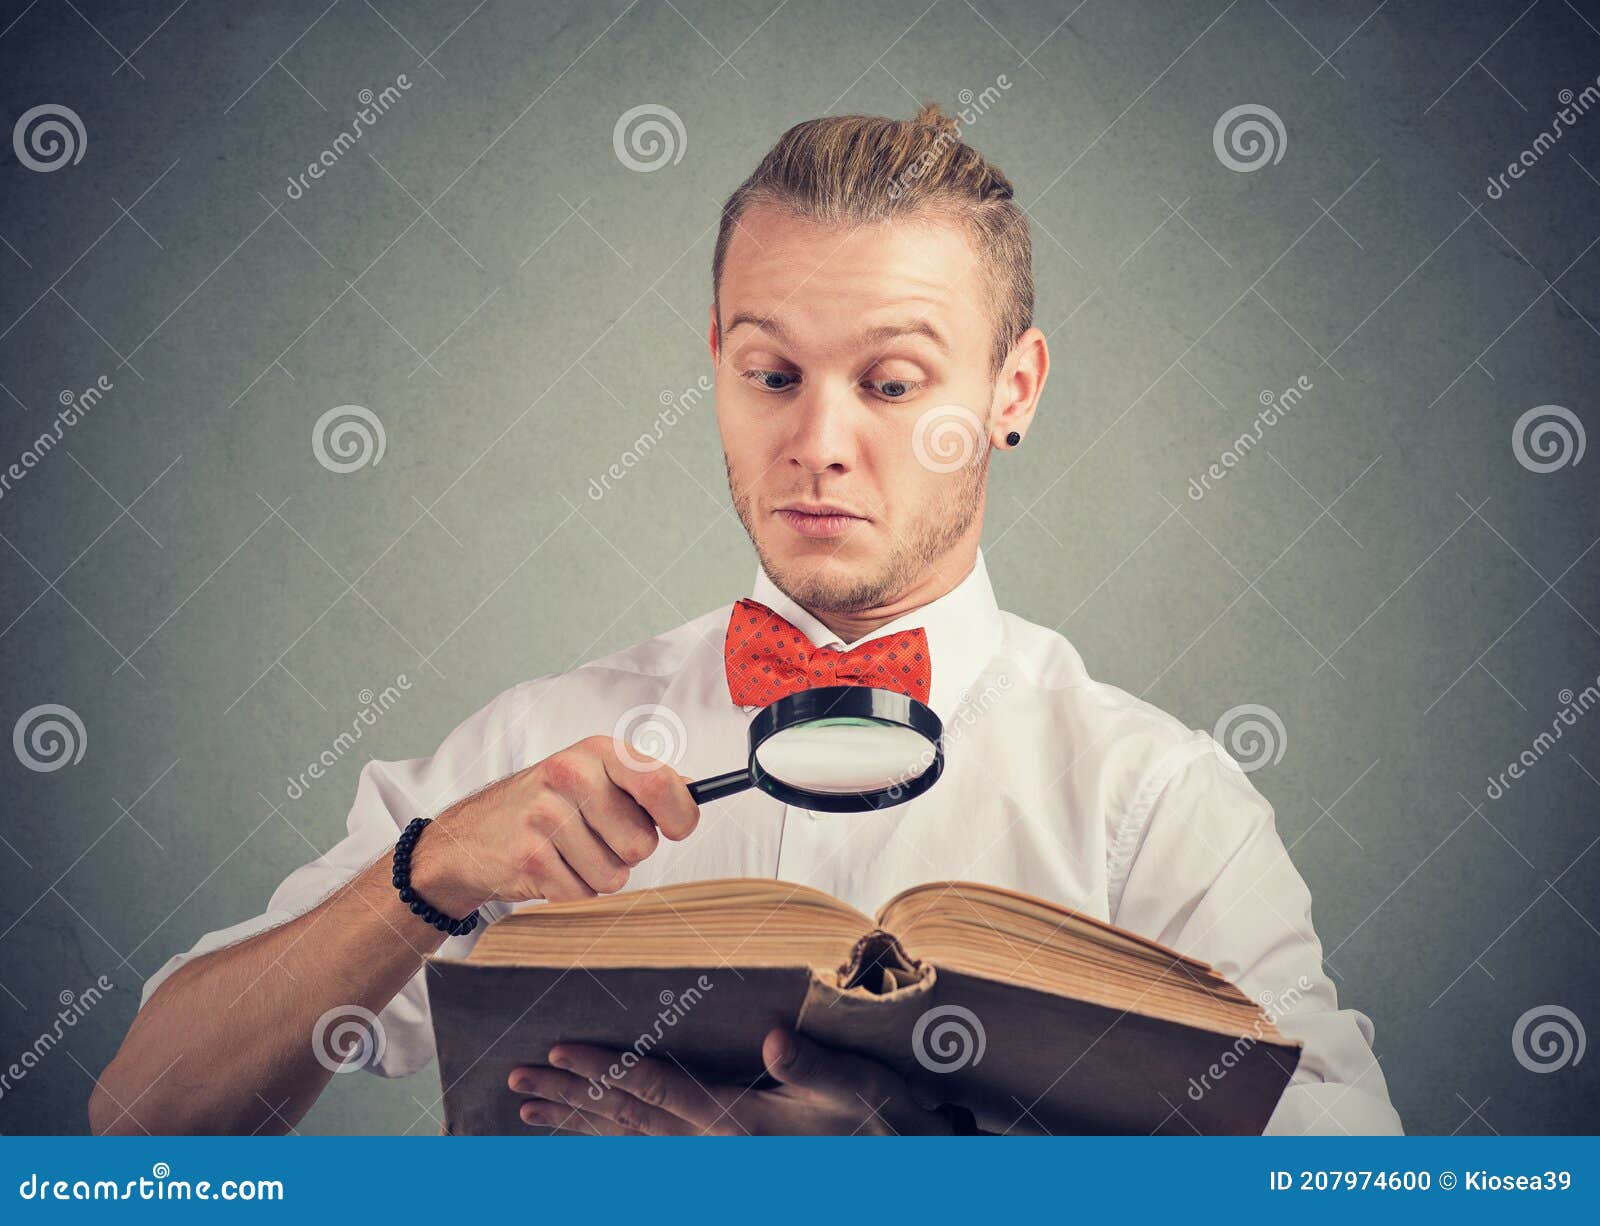 portrait of a man reading an interesting book with magnifying glass